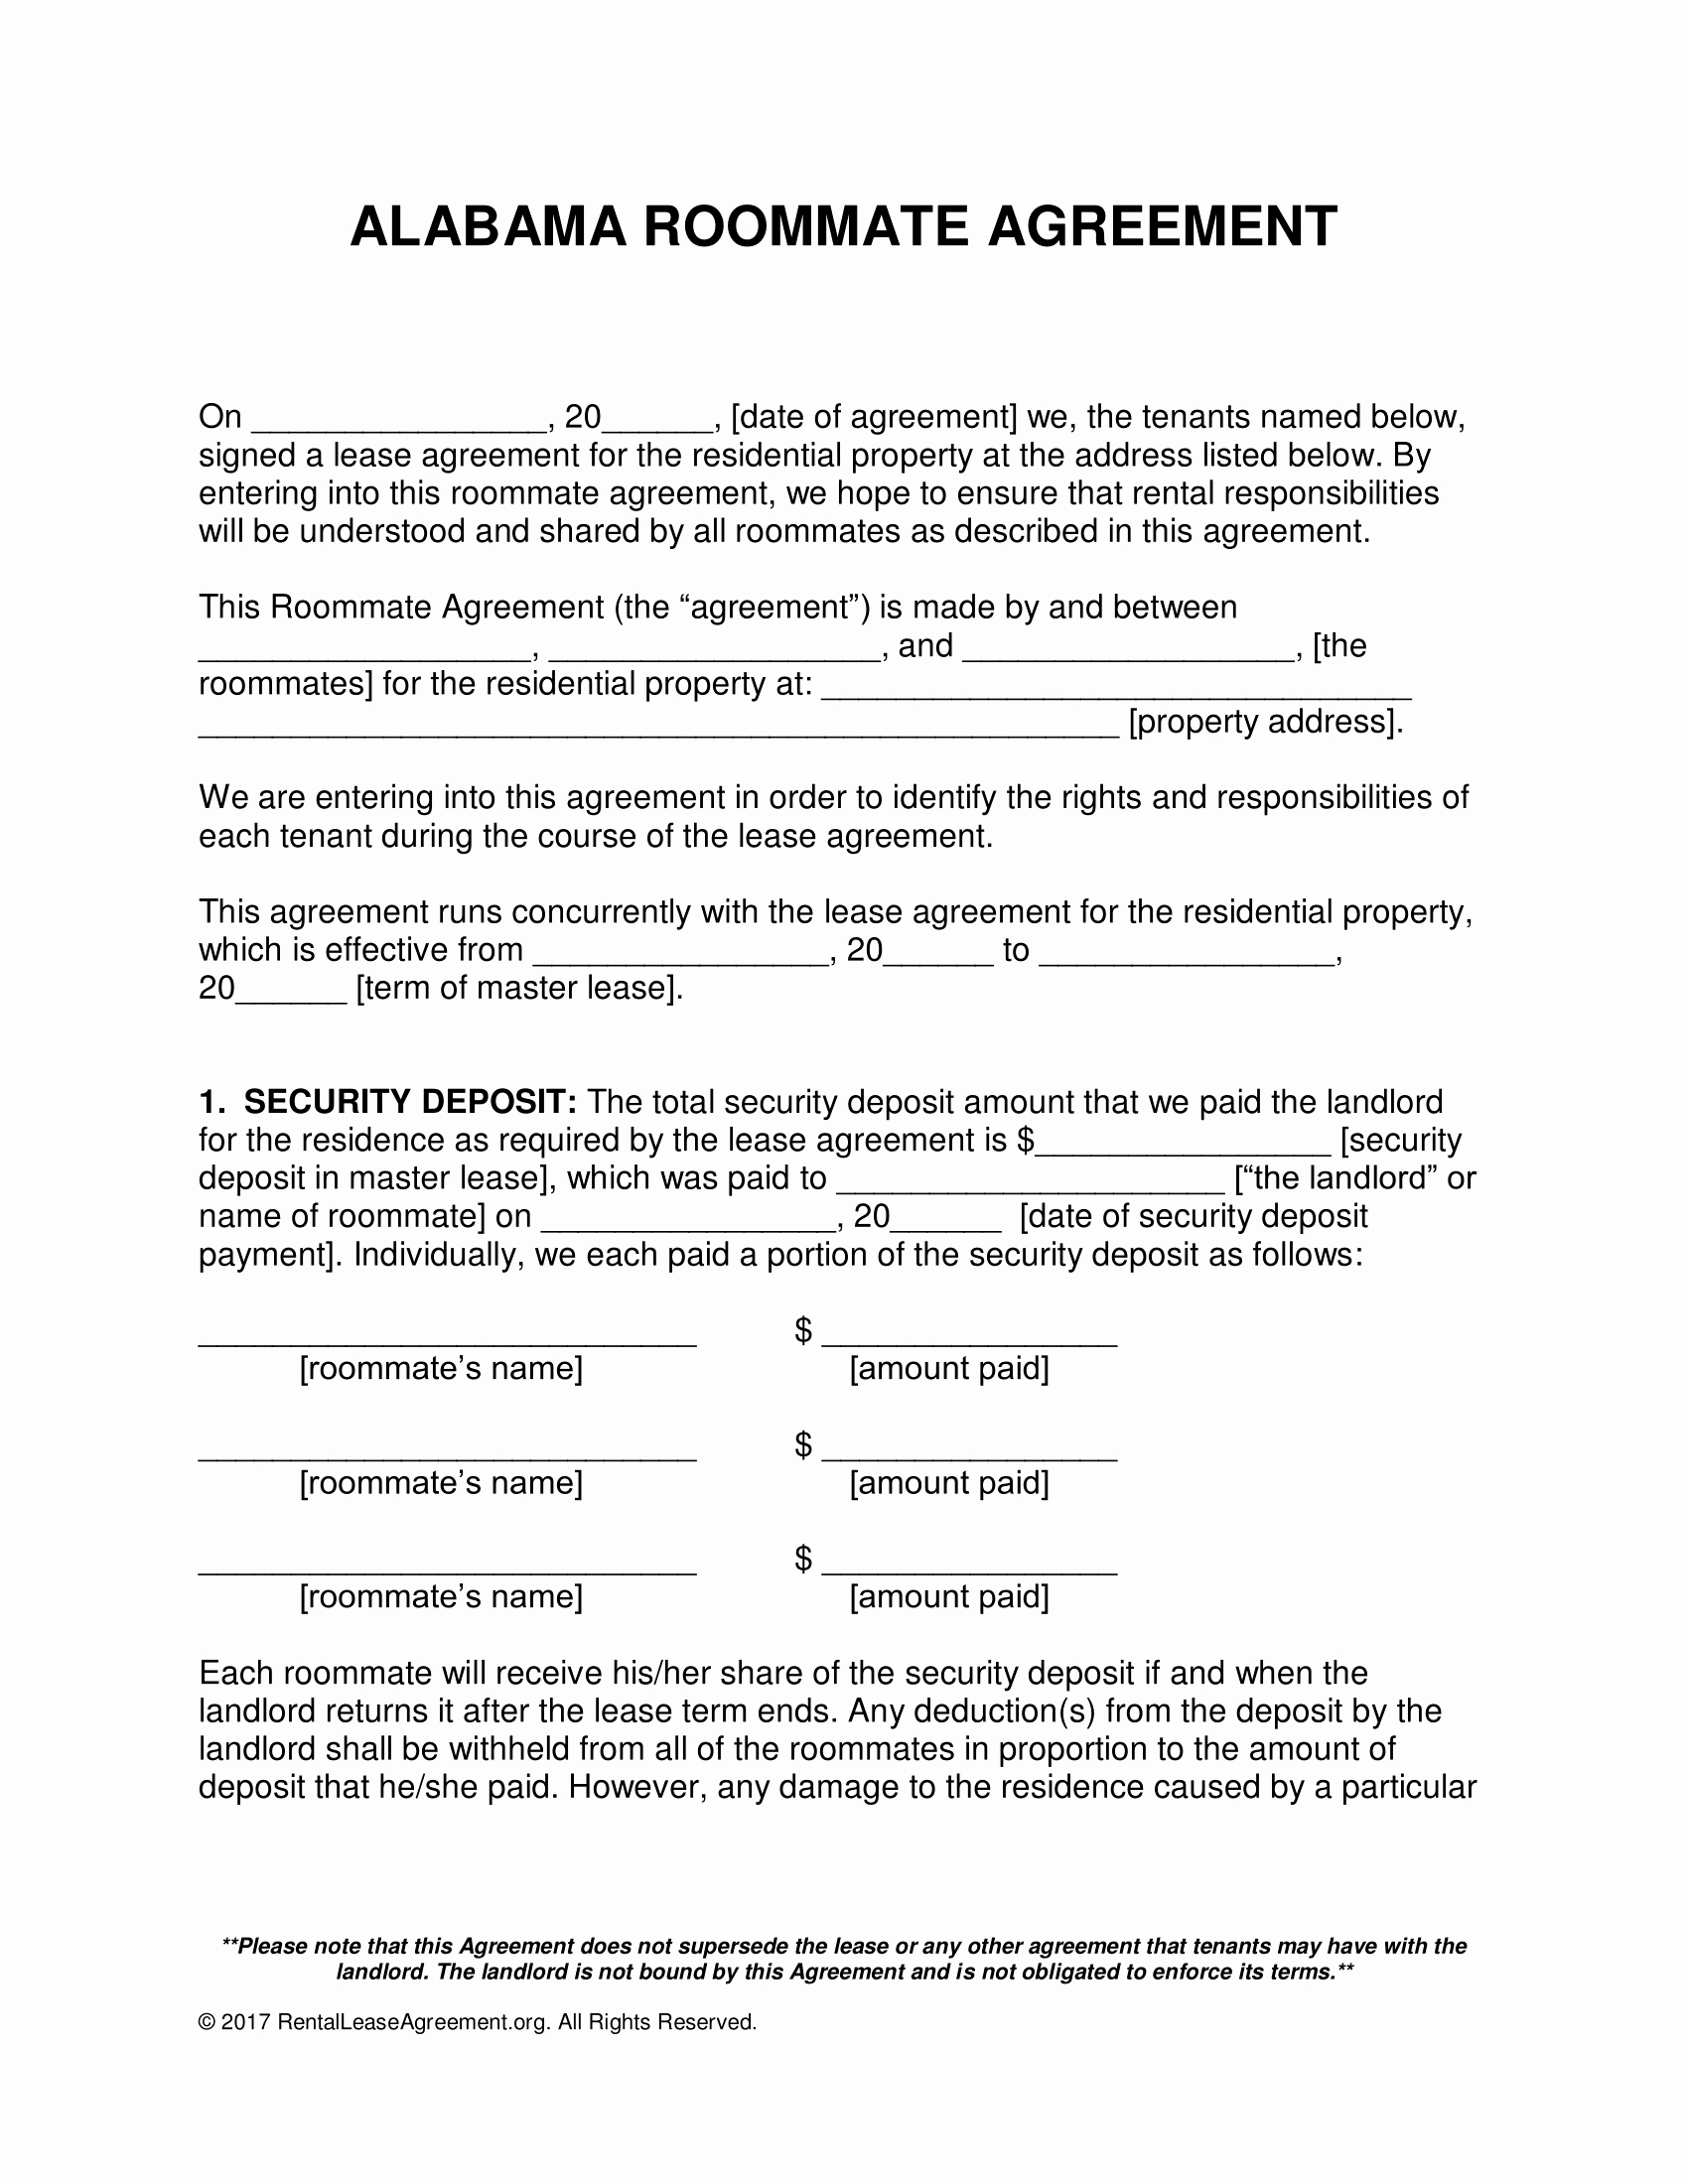 Roommate Agreement Template Free Unique Roommate Agreement form Download Free Business Letter